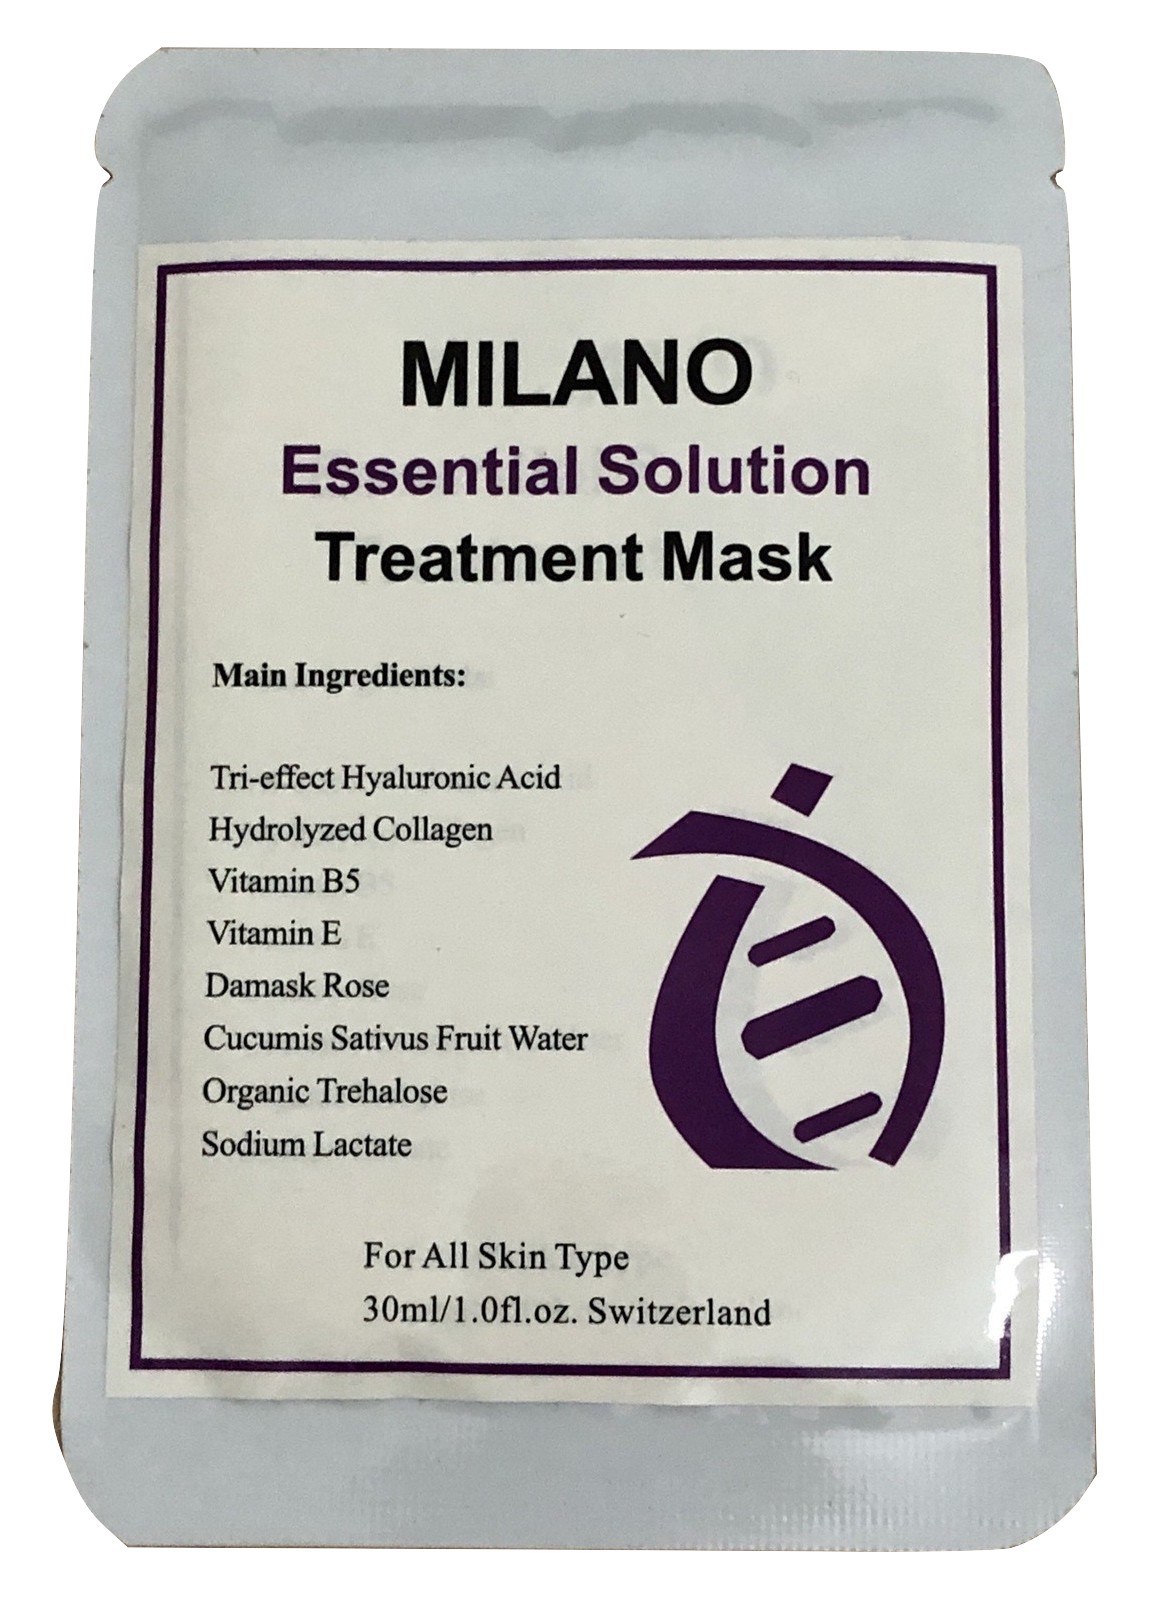 Milano Essential Solution Treatment Mask, Buy 10 Get 1 Free / Buy 20 Get 3 Free